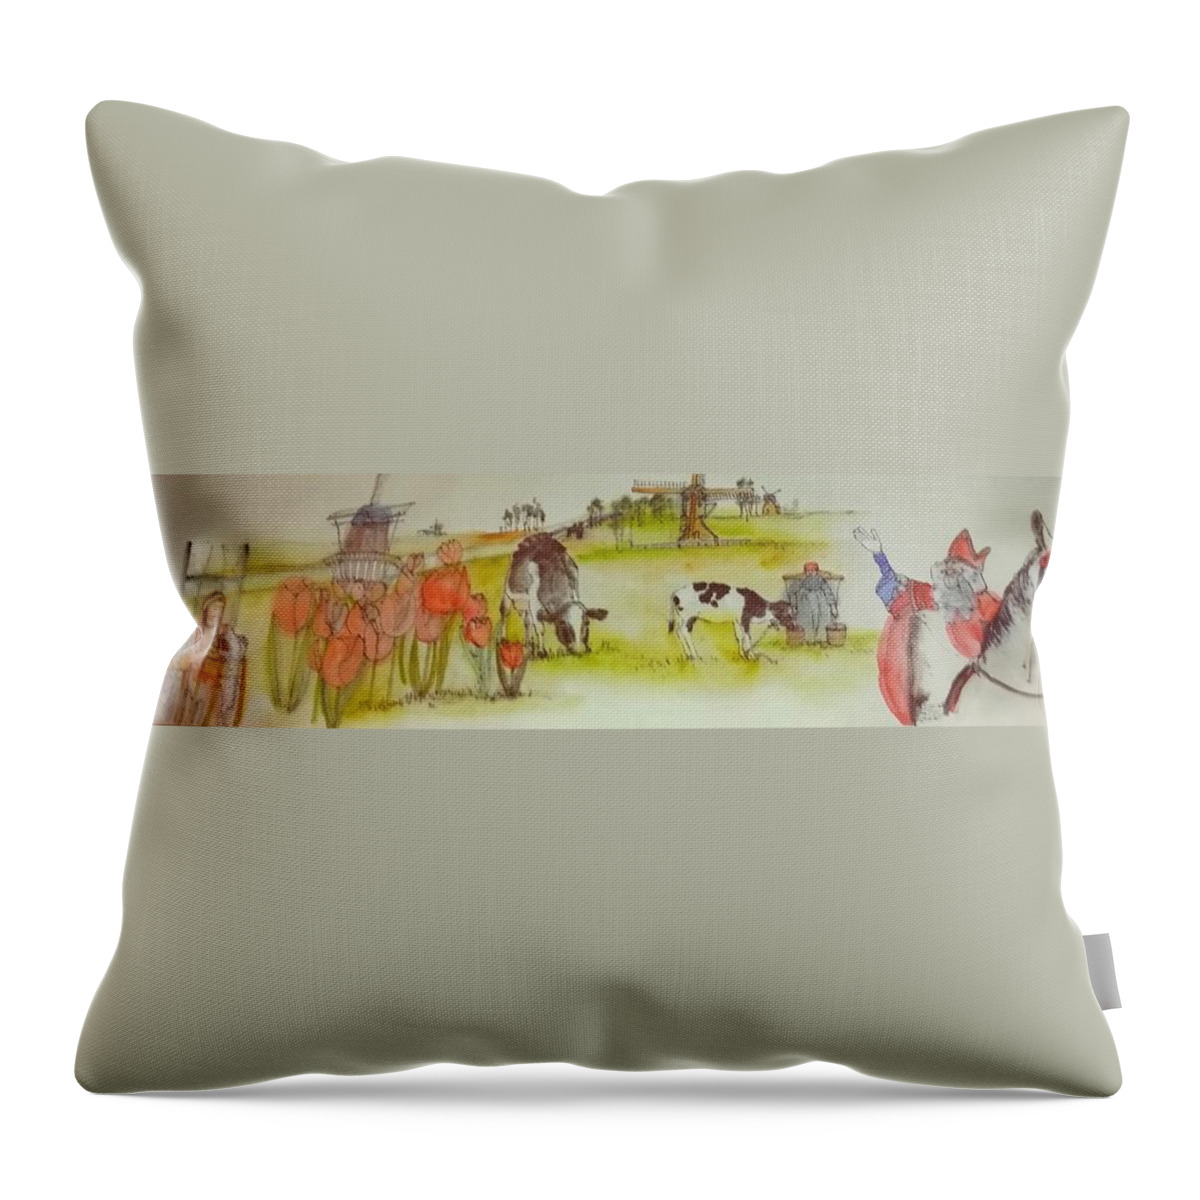 The Netherlands. Landscape. Cows. Sinterklauss. Throw Pillow featuring the painting the Netherlands scroll #1 by Debbi Saccomanno Chan